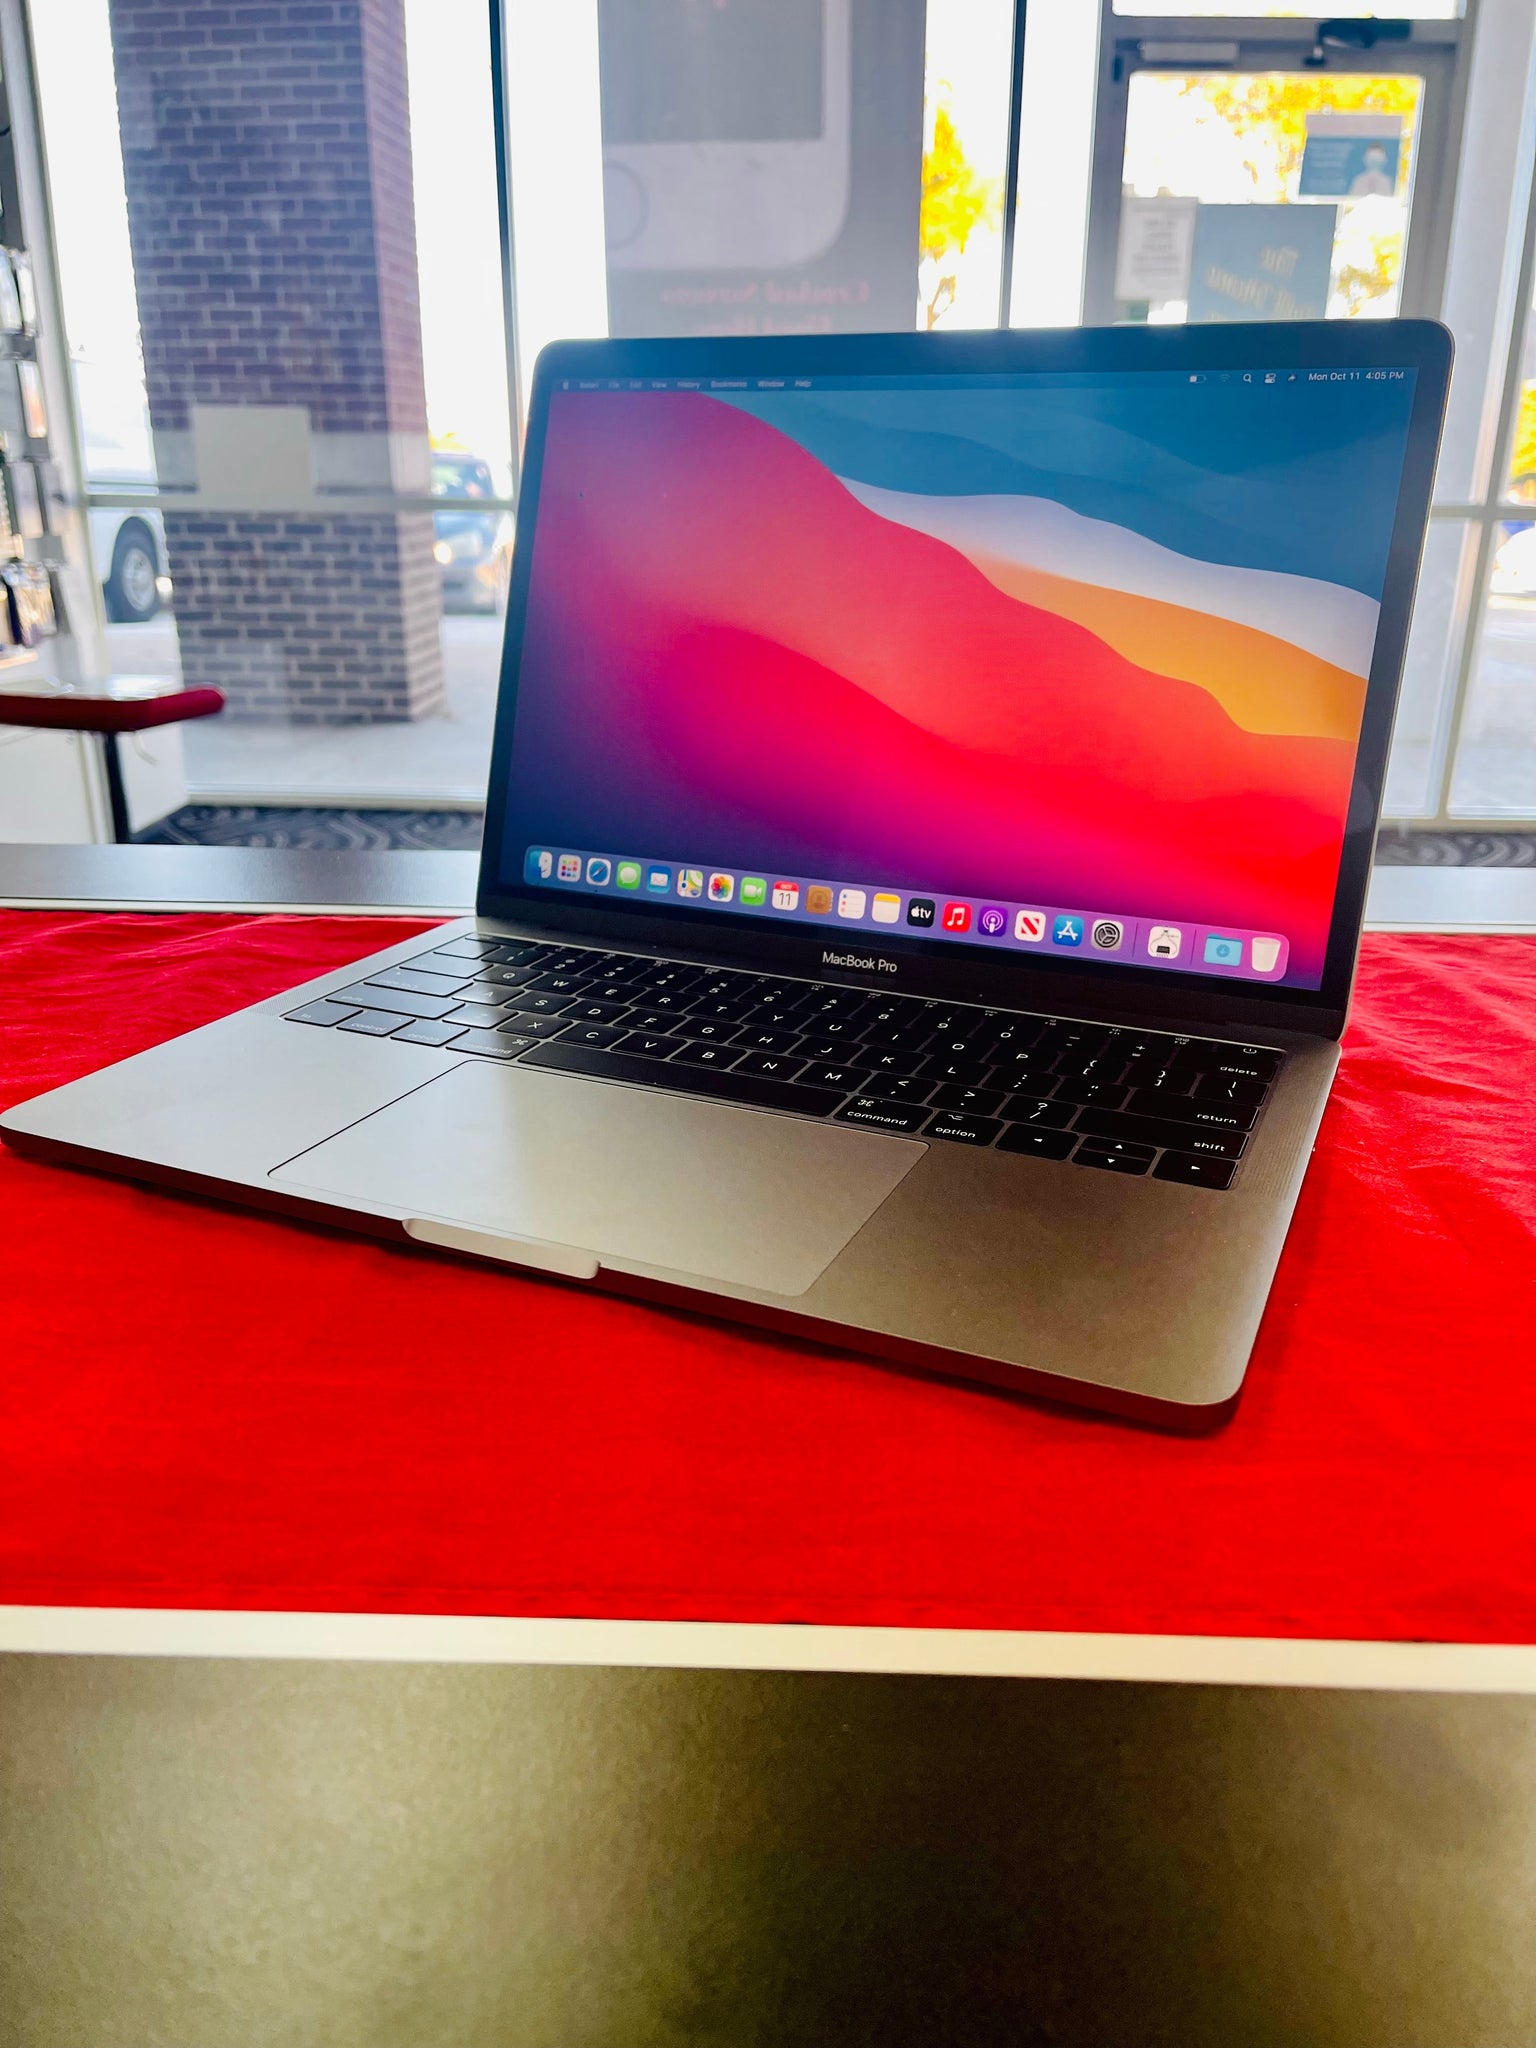 Macbook Pro 2017 i5 256gb 13'' Upgraded Specs OS2020 (Finance for